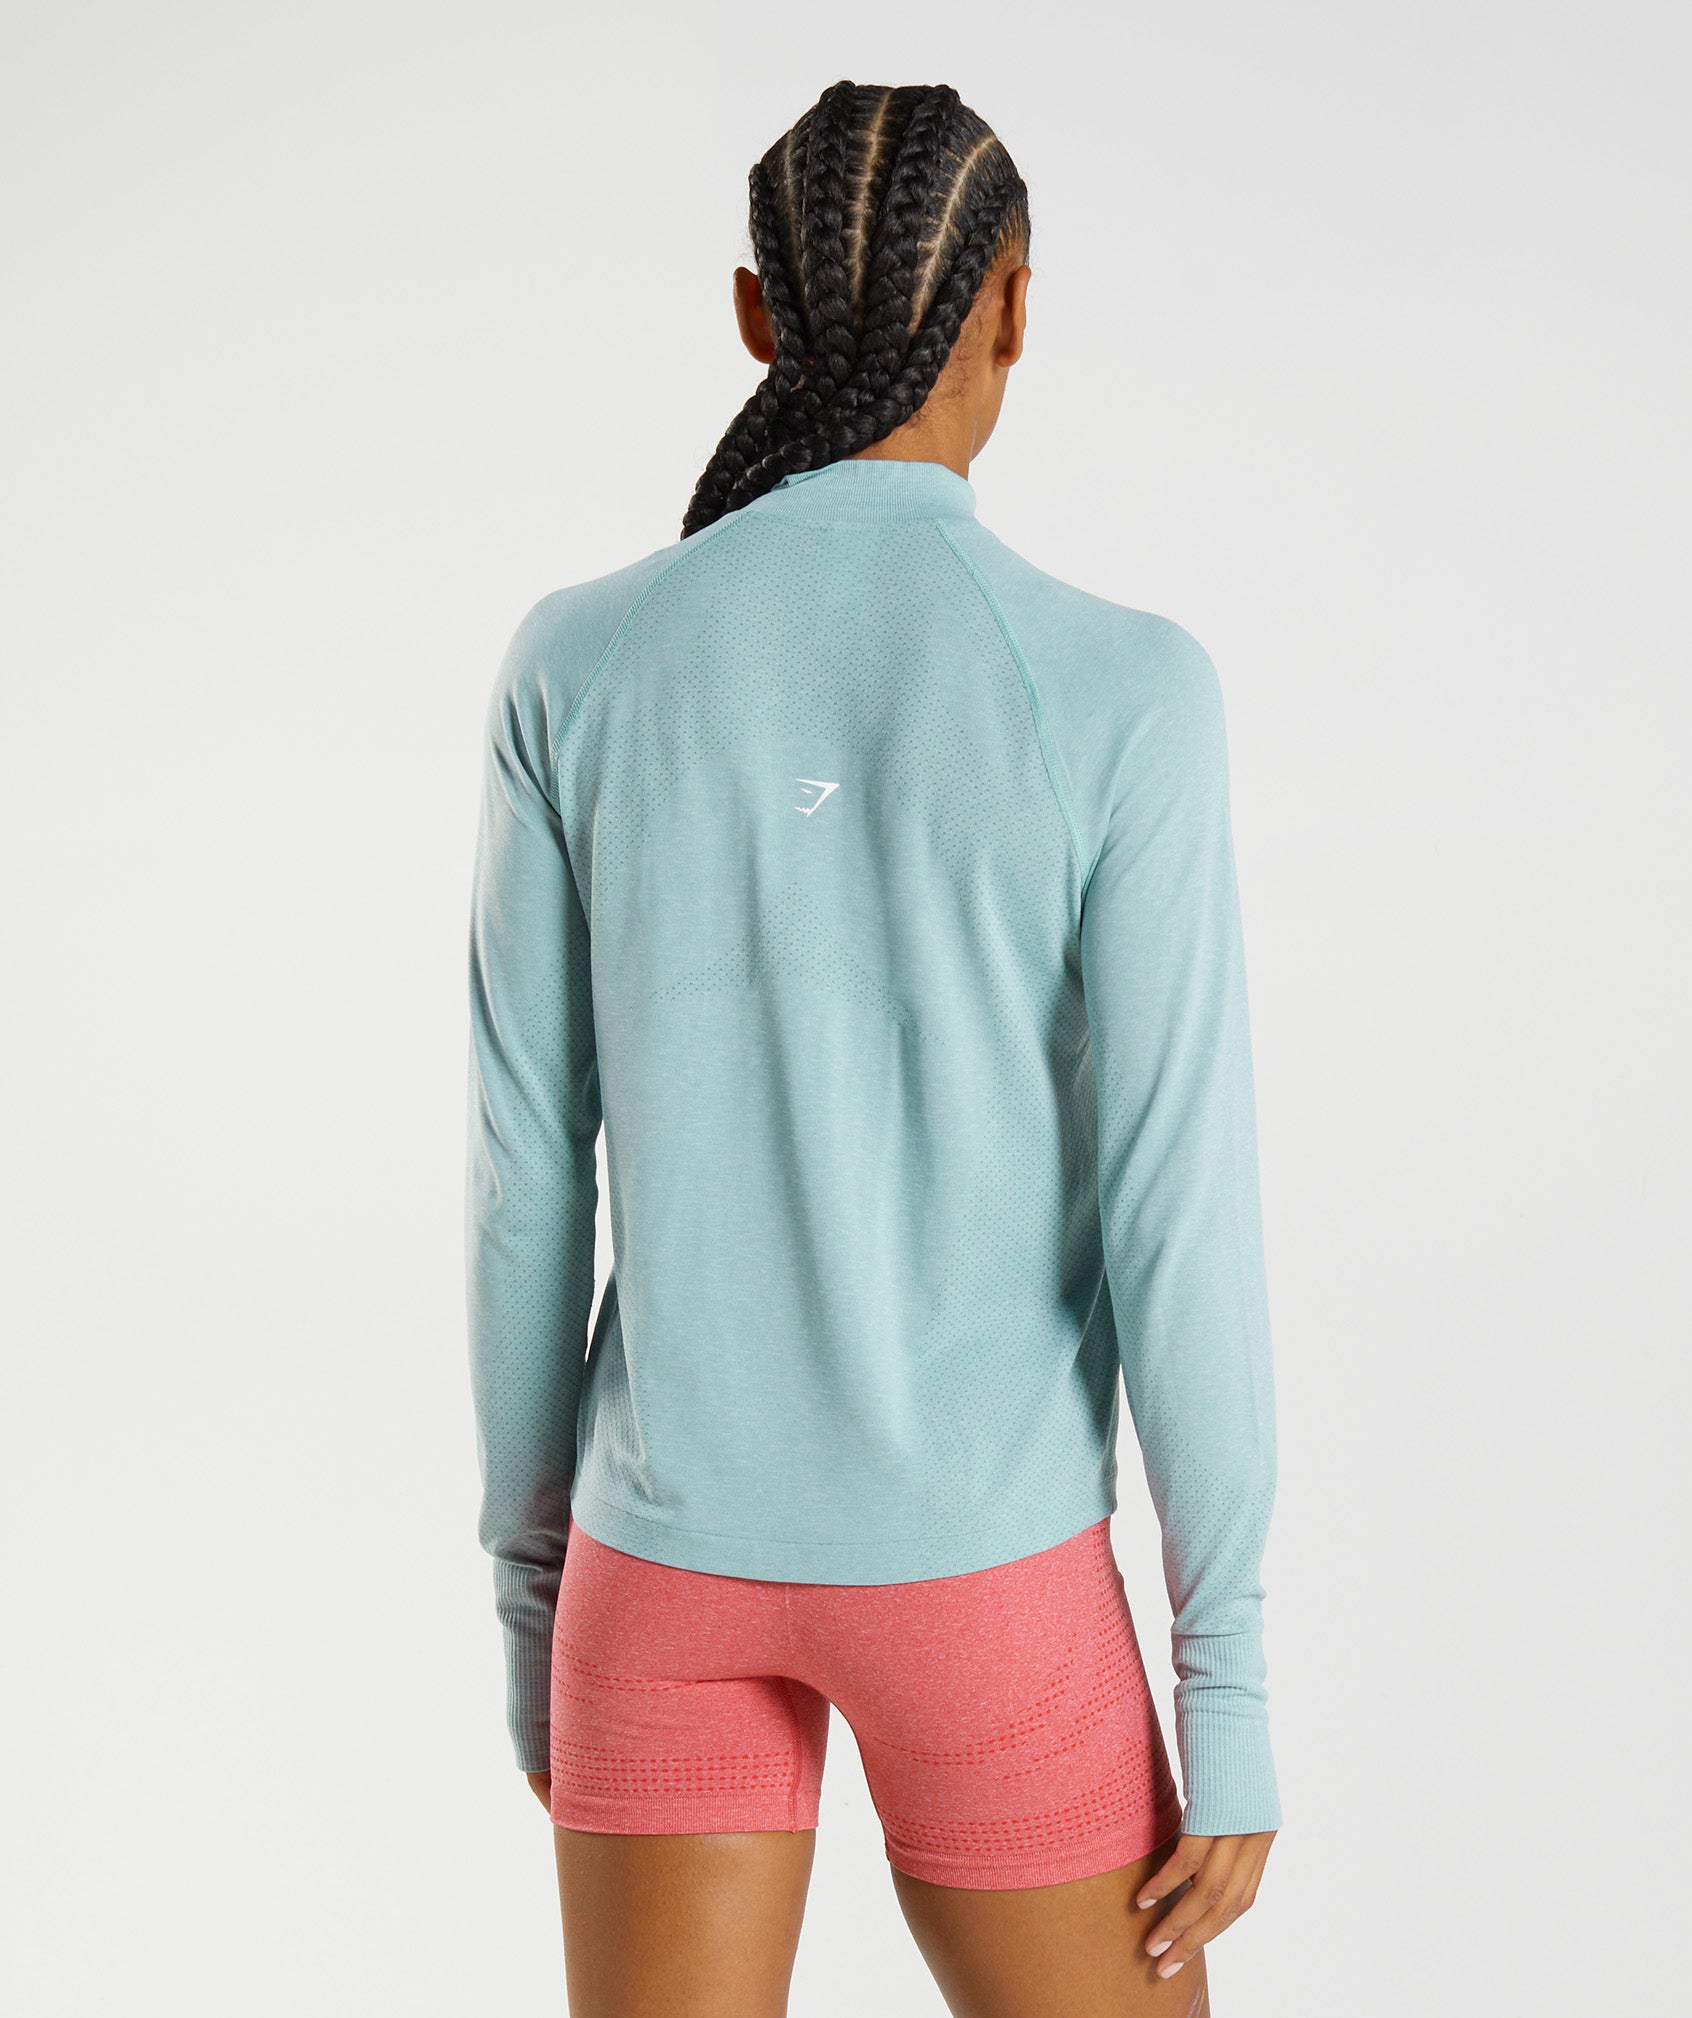 Vital Seamless 2.0 1/2 Zip Pullover in Pearl Blue Marl - view 2